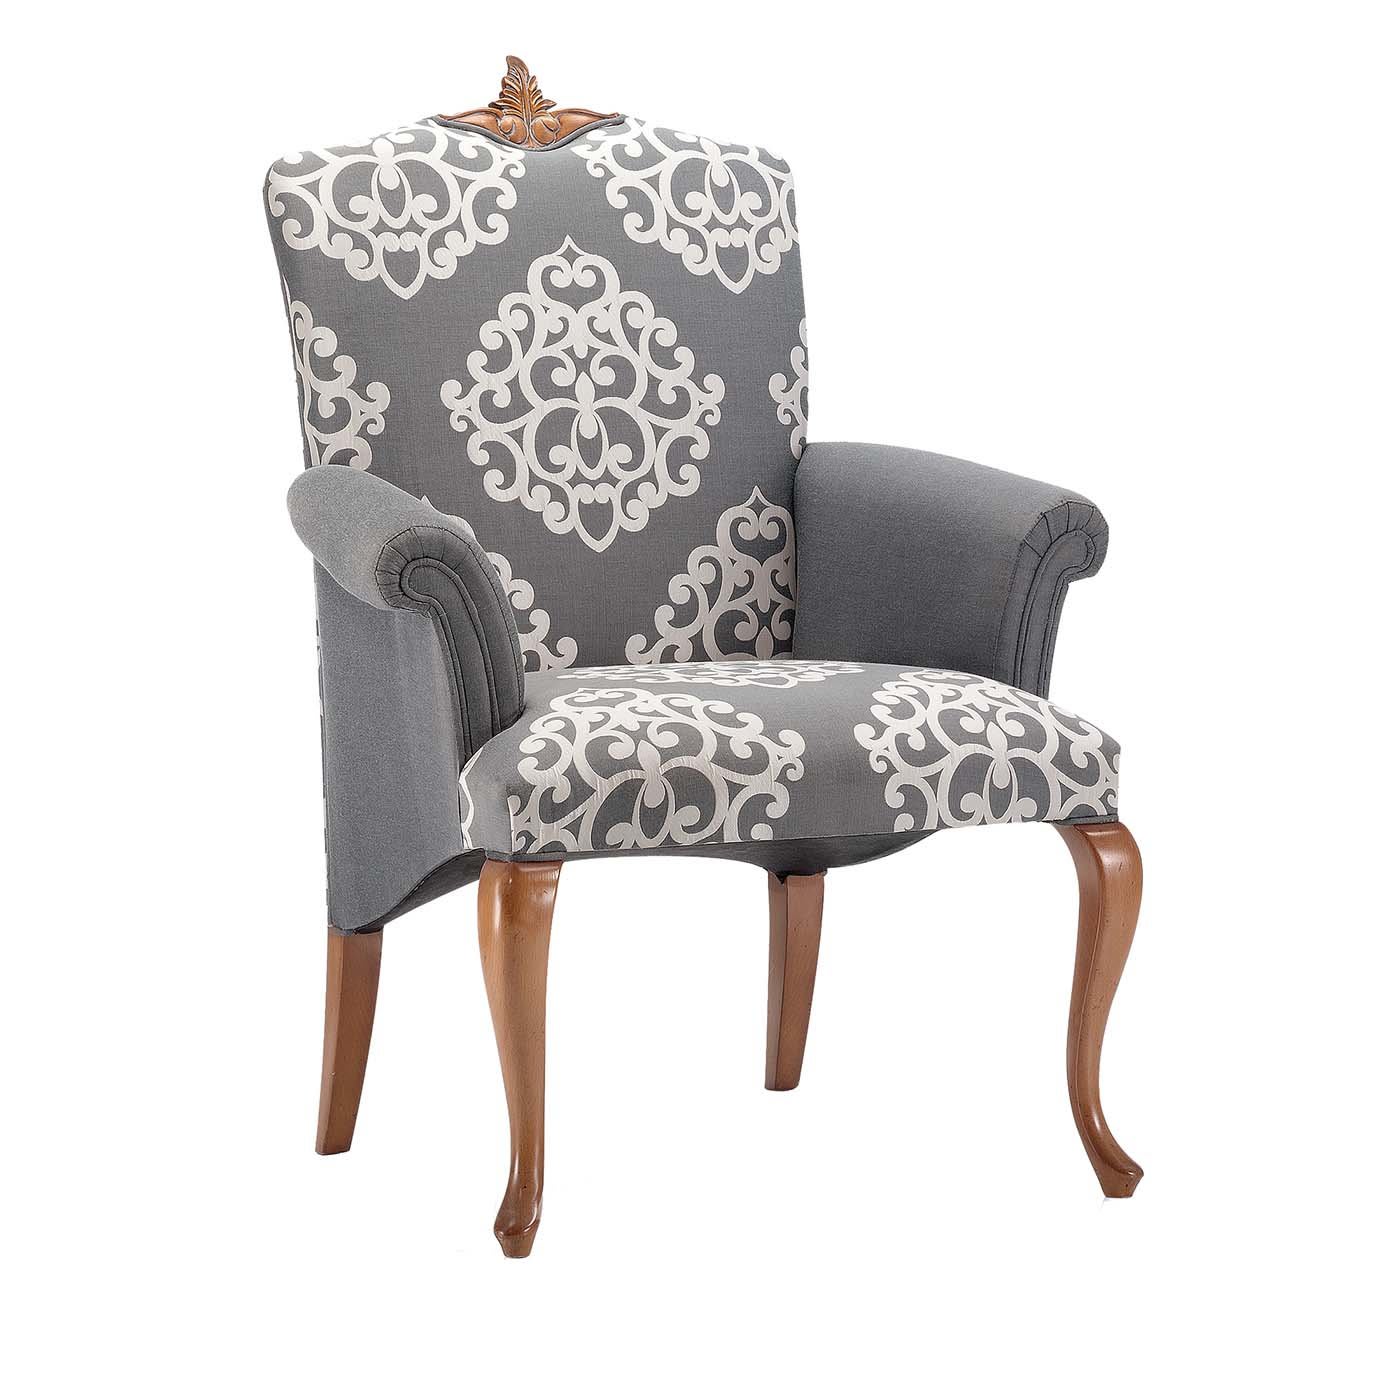 Gray Damask Chair with Armrests - Modenese Gastone